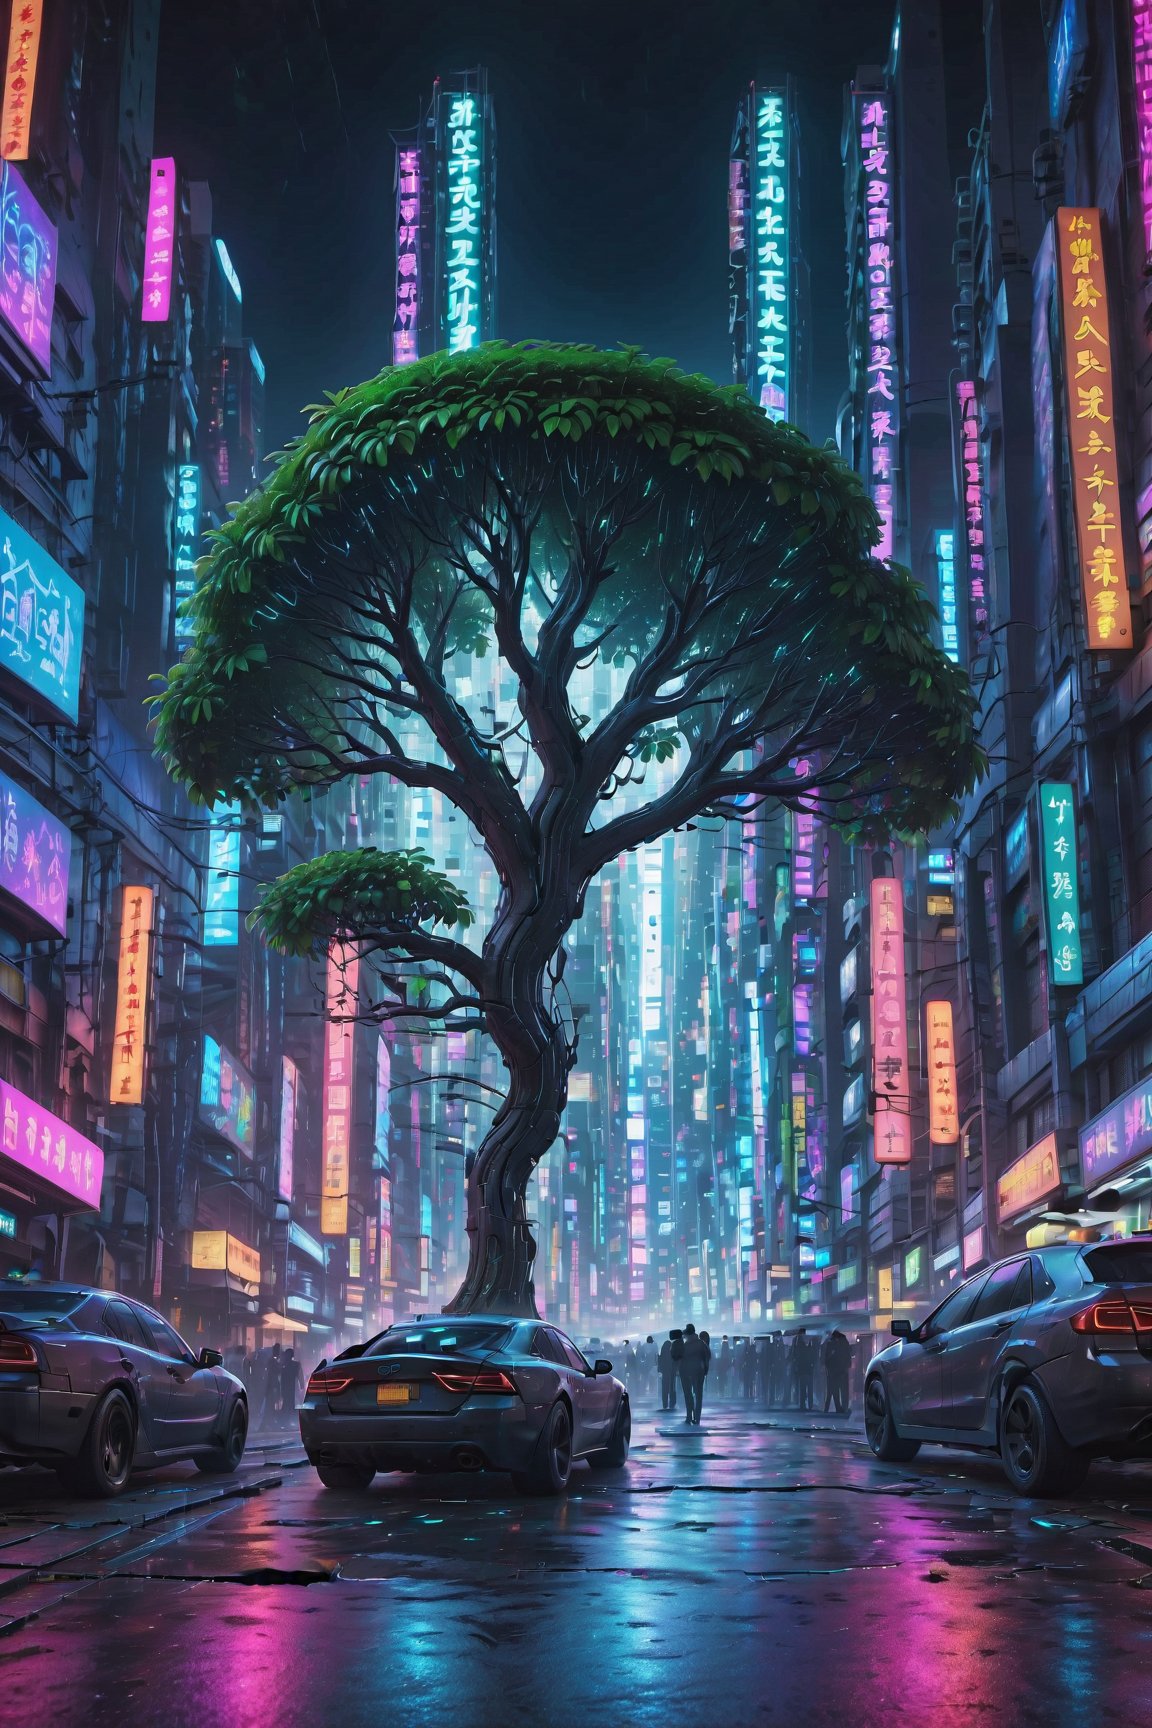 (best quality,4k,8k,highres,masterpiece:1.2),ultra-detailed,(realistic,photorealistic,photo-realistic:1.37),cyberpunk tree,neon lights,giant tree with metallic trunk and glowing branches,glowing leaves,interconnected roots,branch-like cables and wires,hovering drones,urban cityscape background,reflective surfaces,technology-infused atmosphere,glimmering holographic projections,digitalized forest,sci-fi elements,nighttime scene,vibrant colors,dimly-lit buildings,emitting smoke and steam,ethereal glow from the tree,artificial intelligence influence,blinking lights,high-tech energy source,layered and intricate details,metropolis merging with nature,futuristic twist on traditional landscapes,blurred motion of flying vehicles,chasing lights,breath-taking perspective,metallic shards scattered on the ground,science fiction-inspired setting,otherworldly aura,uncanny blend of nature and technology,ensnaring vines with LED patterns,atmospheric pollution,shadowy silhouettes of people in awe,floating augmented reality interfaces,gritty and dystopian vibes